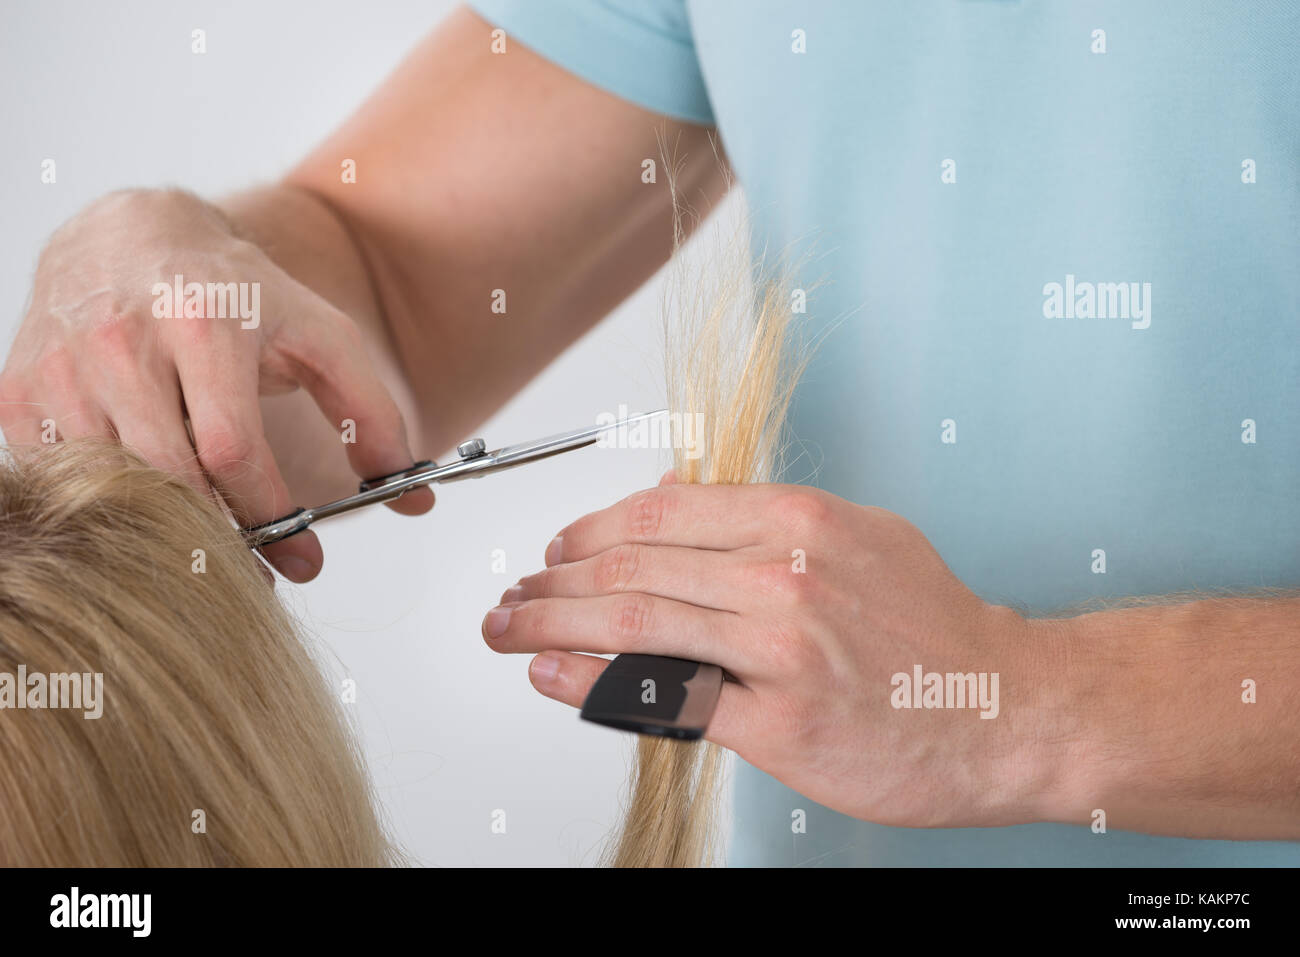 Cropped image of young woman having her hair cut by male dresser at salon Stock Photo